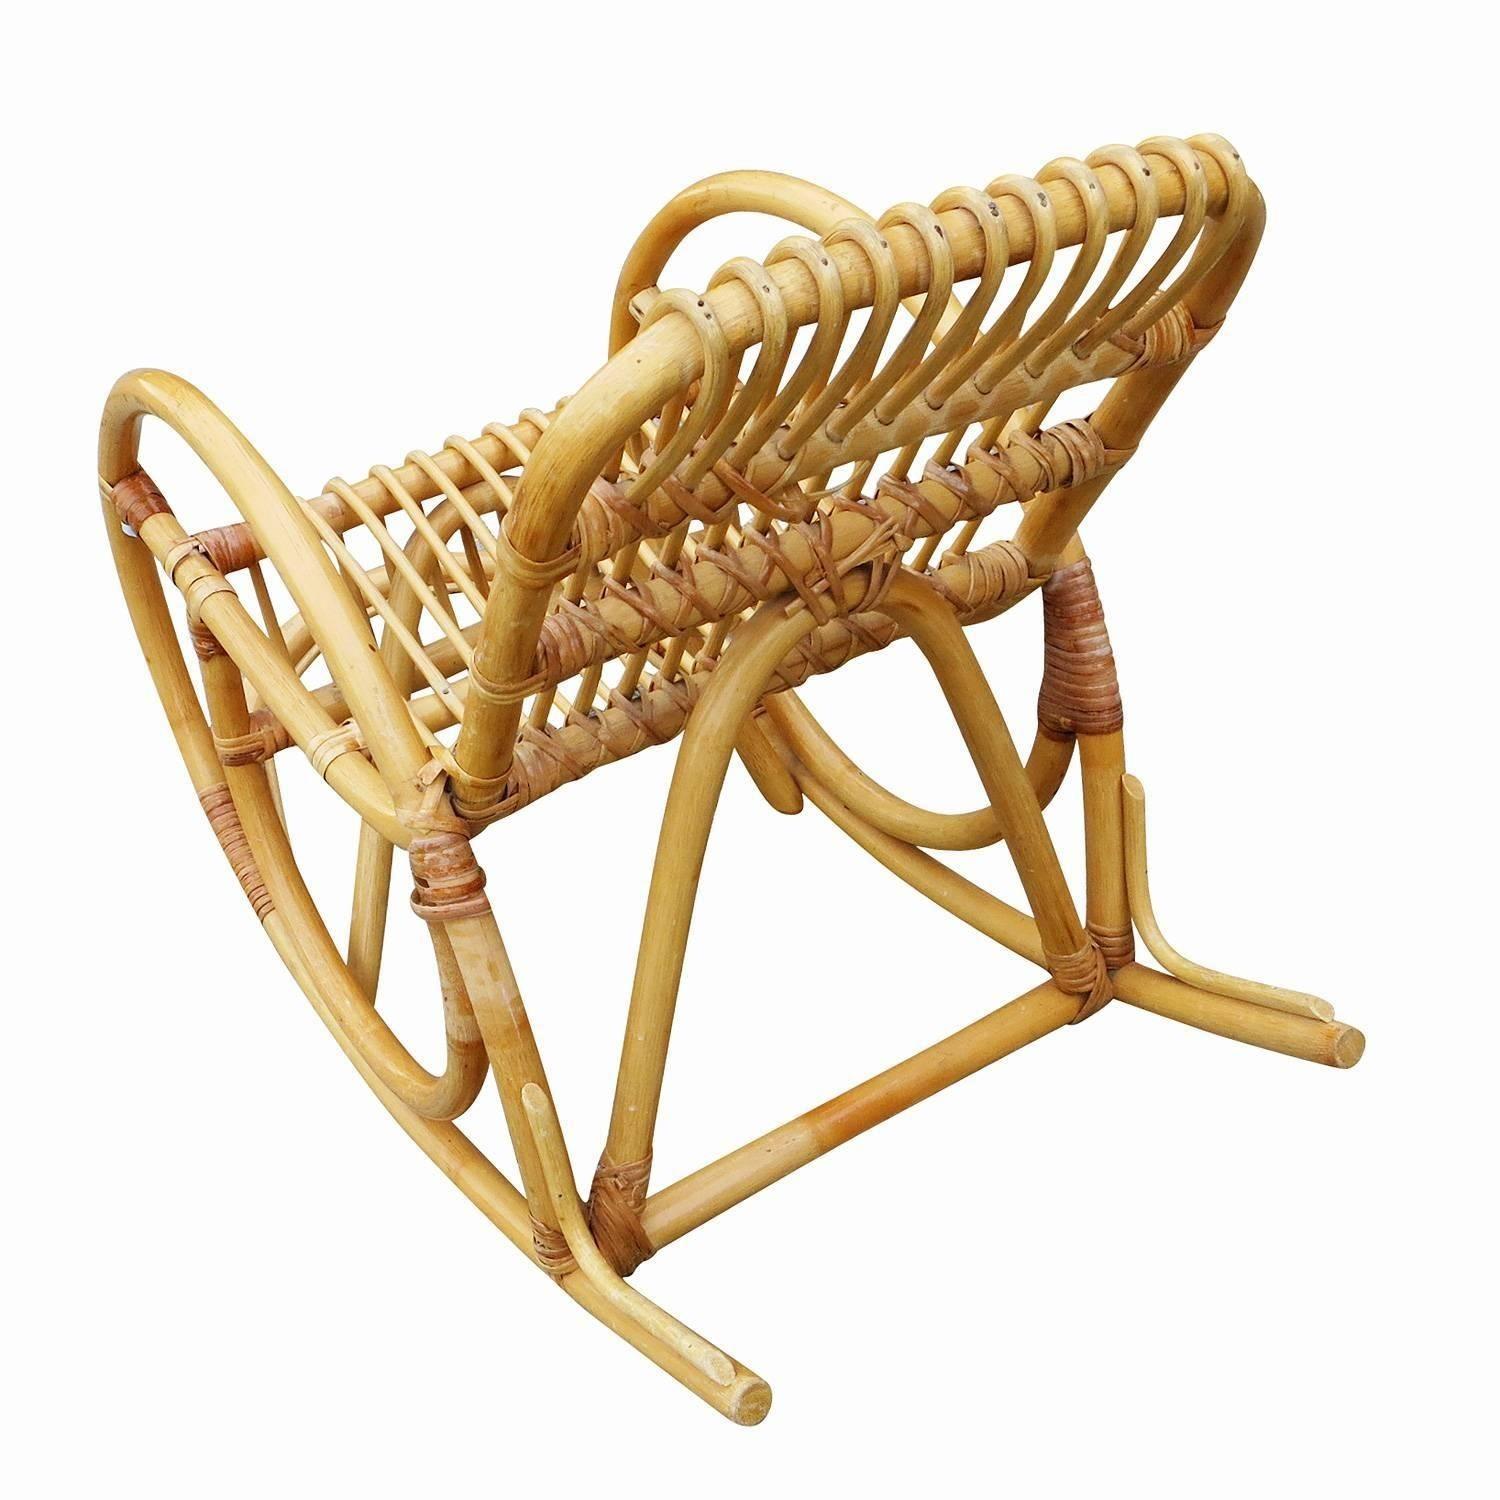 Restored Vintage Rare Snake Arm Rattan Children's Rocking Chair In Excellent Condition For Sale In Van Nuys, CA